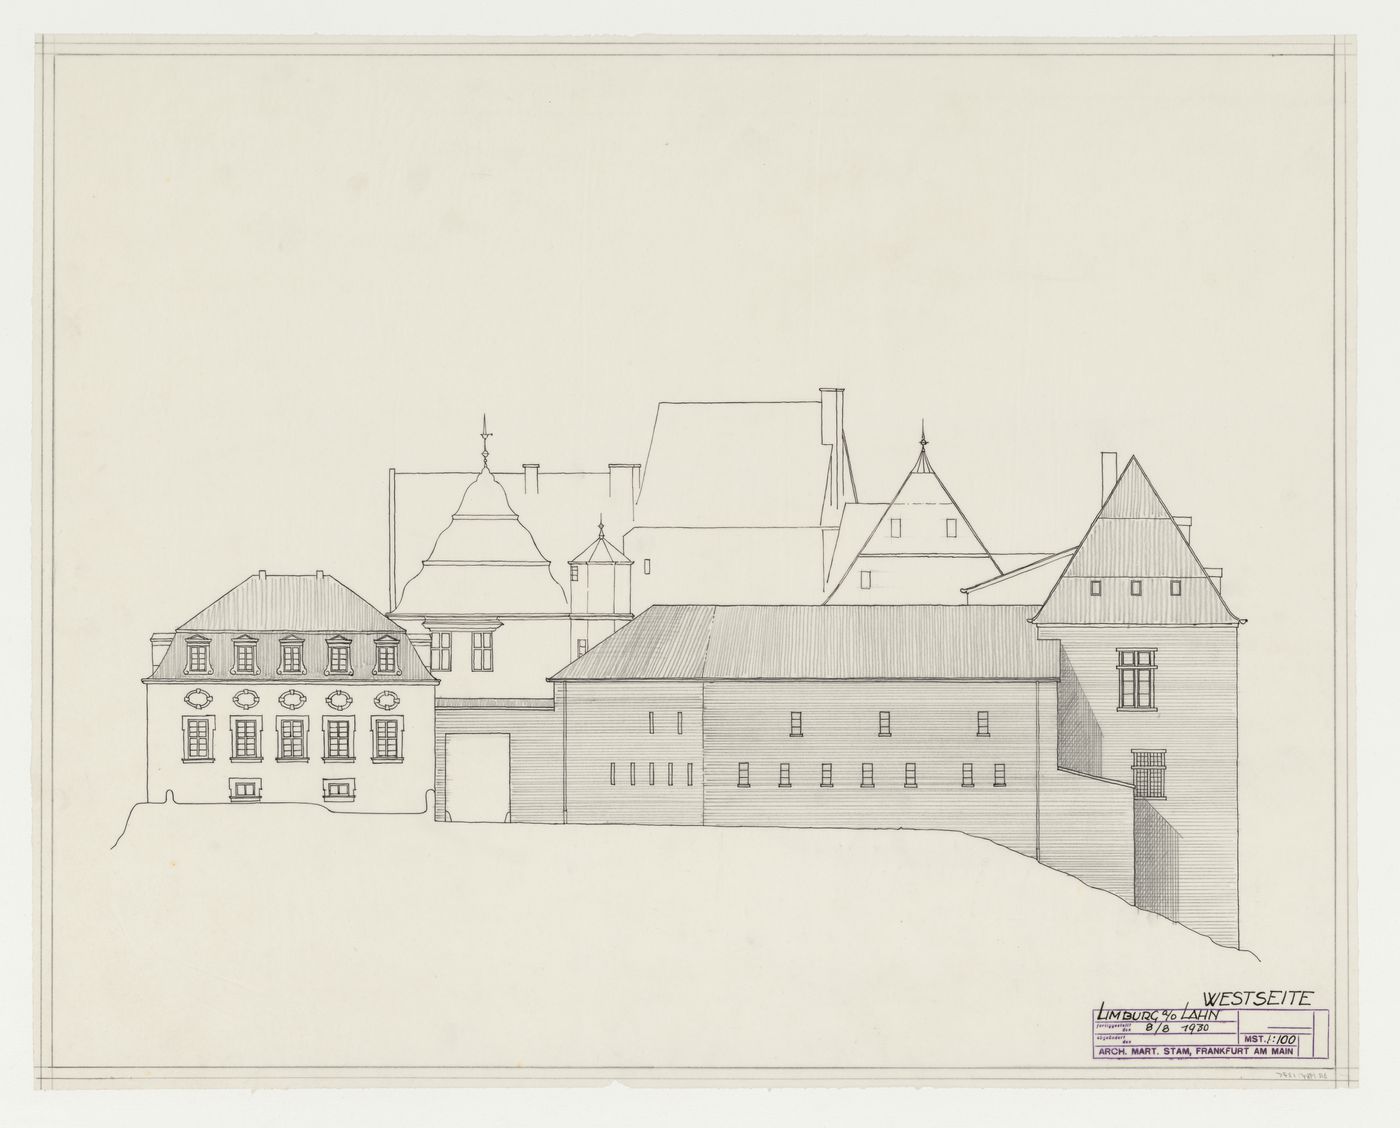 West elevation for an addition to an existing building, possibly a school, Limburg an der Lahn, Germany